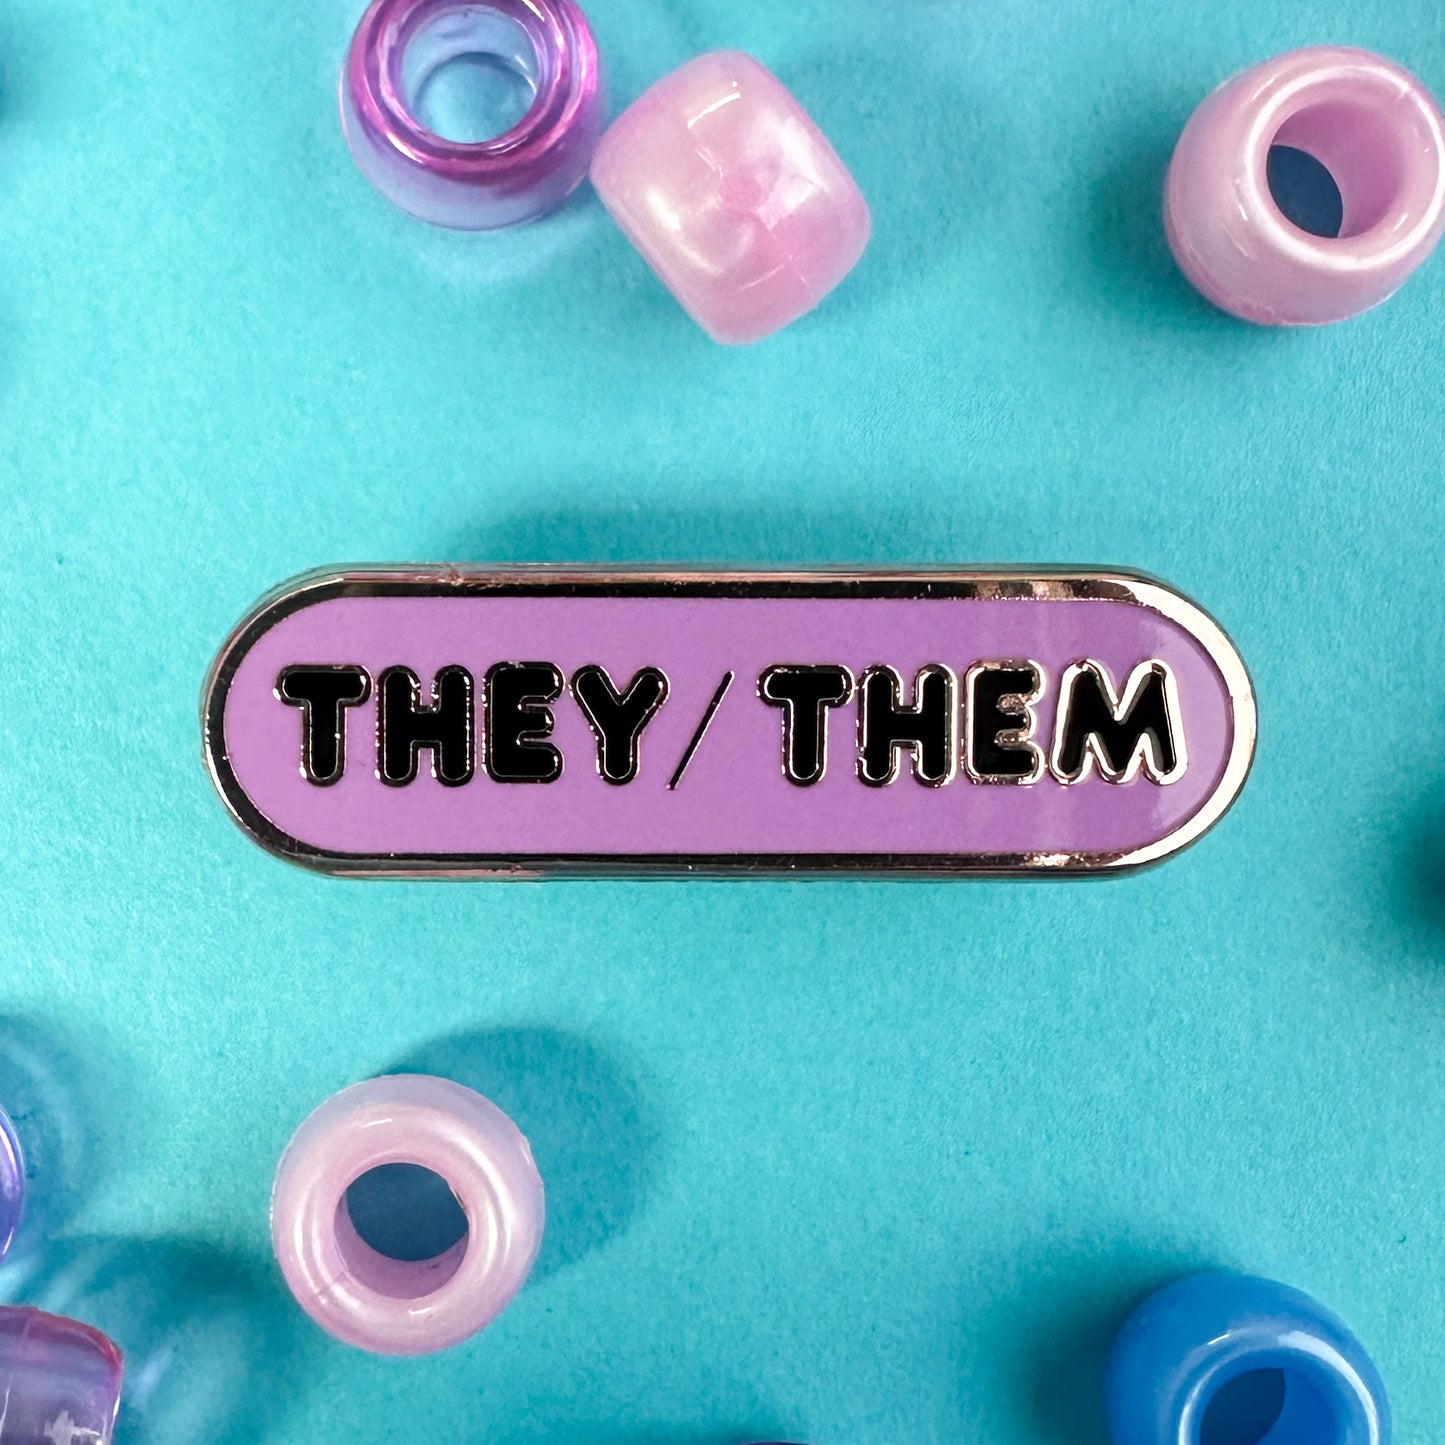 An oval lavender pin with black bubble letters on it. The pin is on a blue background with pink and blue pony beads around it. 